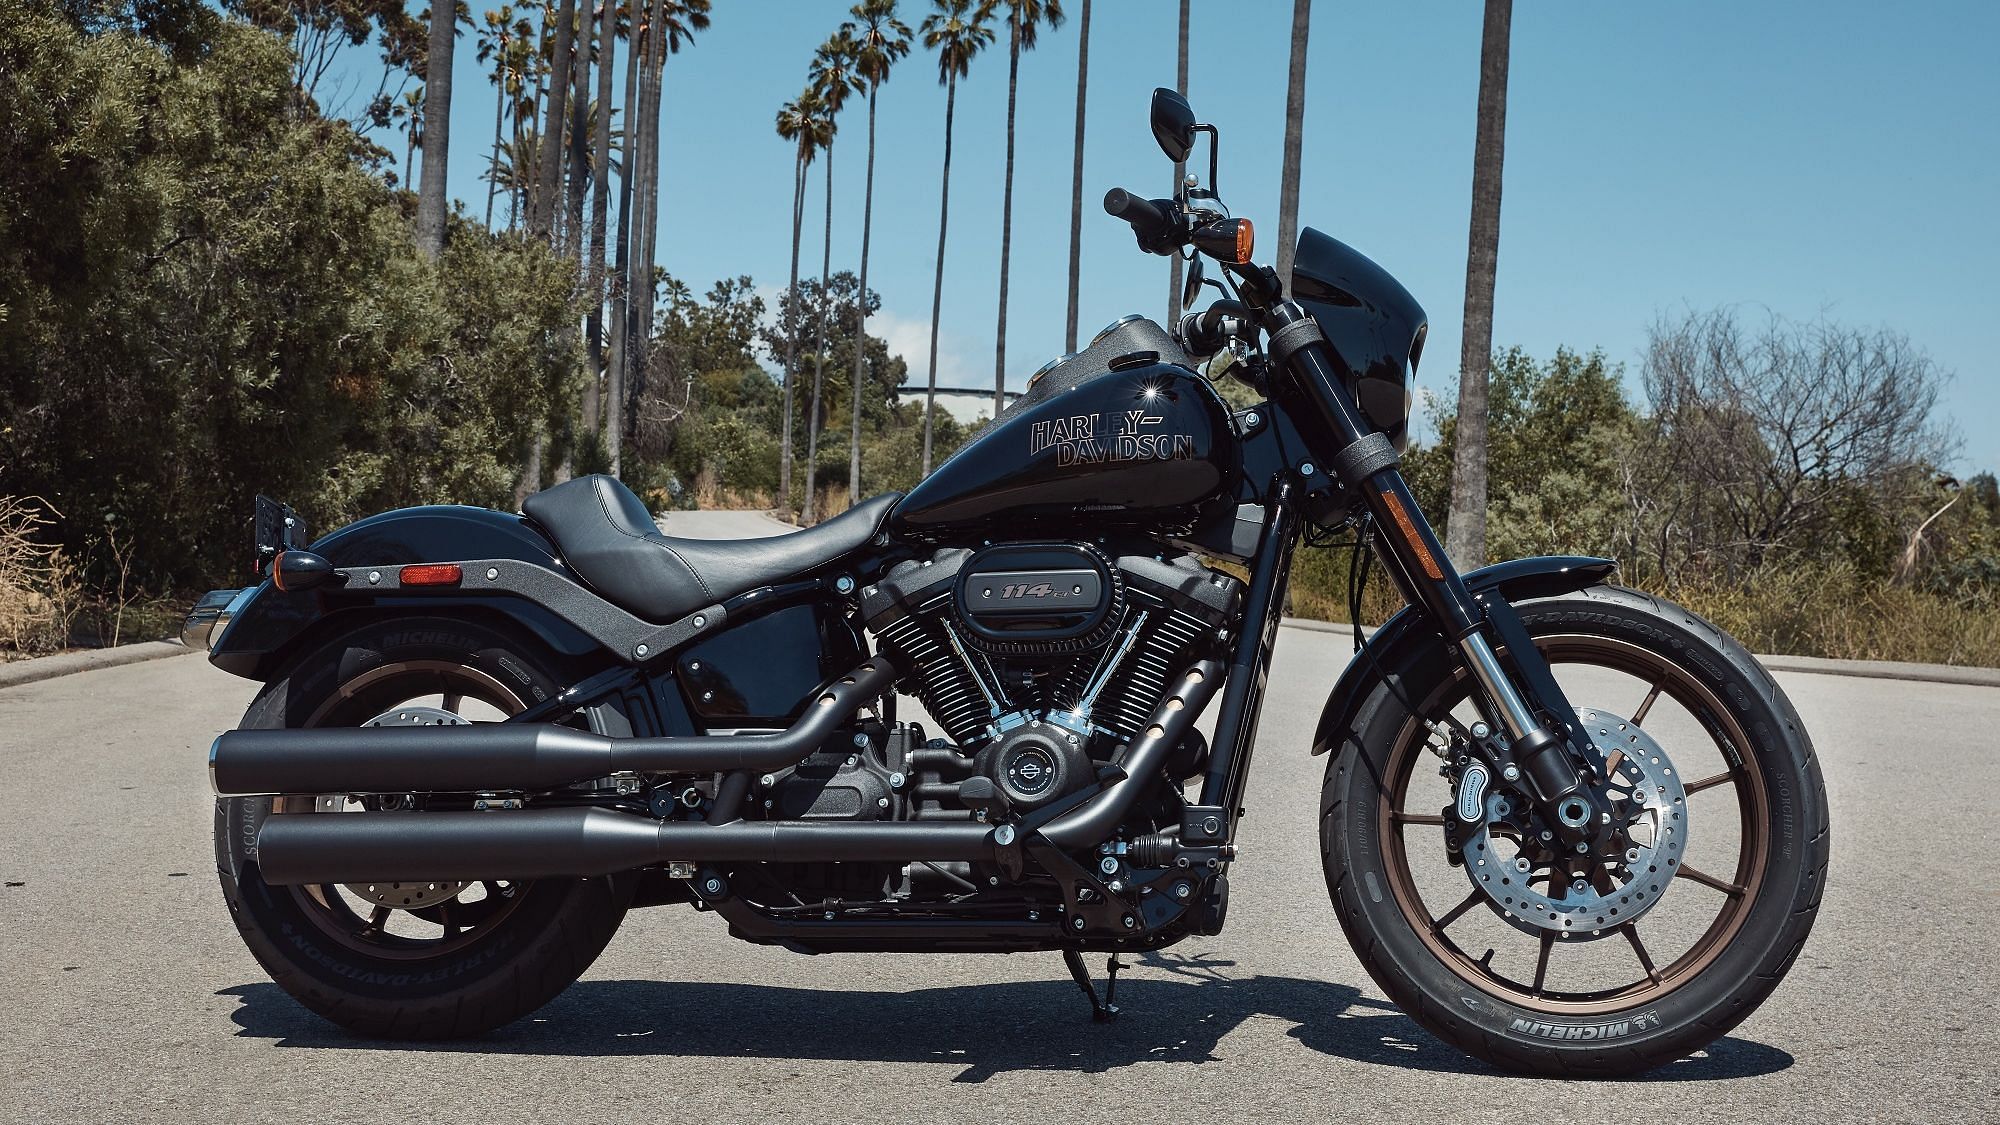 2020 Harley Davidson Low Rider S India Launch Price And Specifications